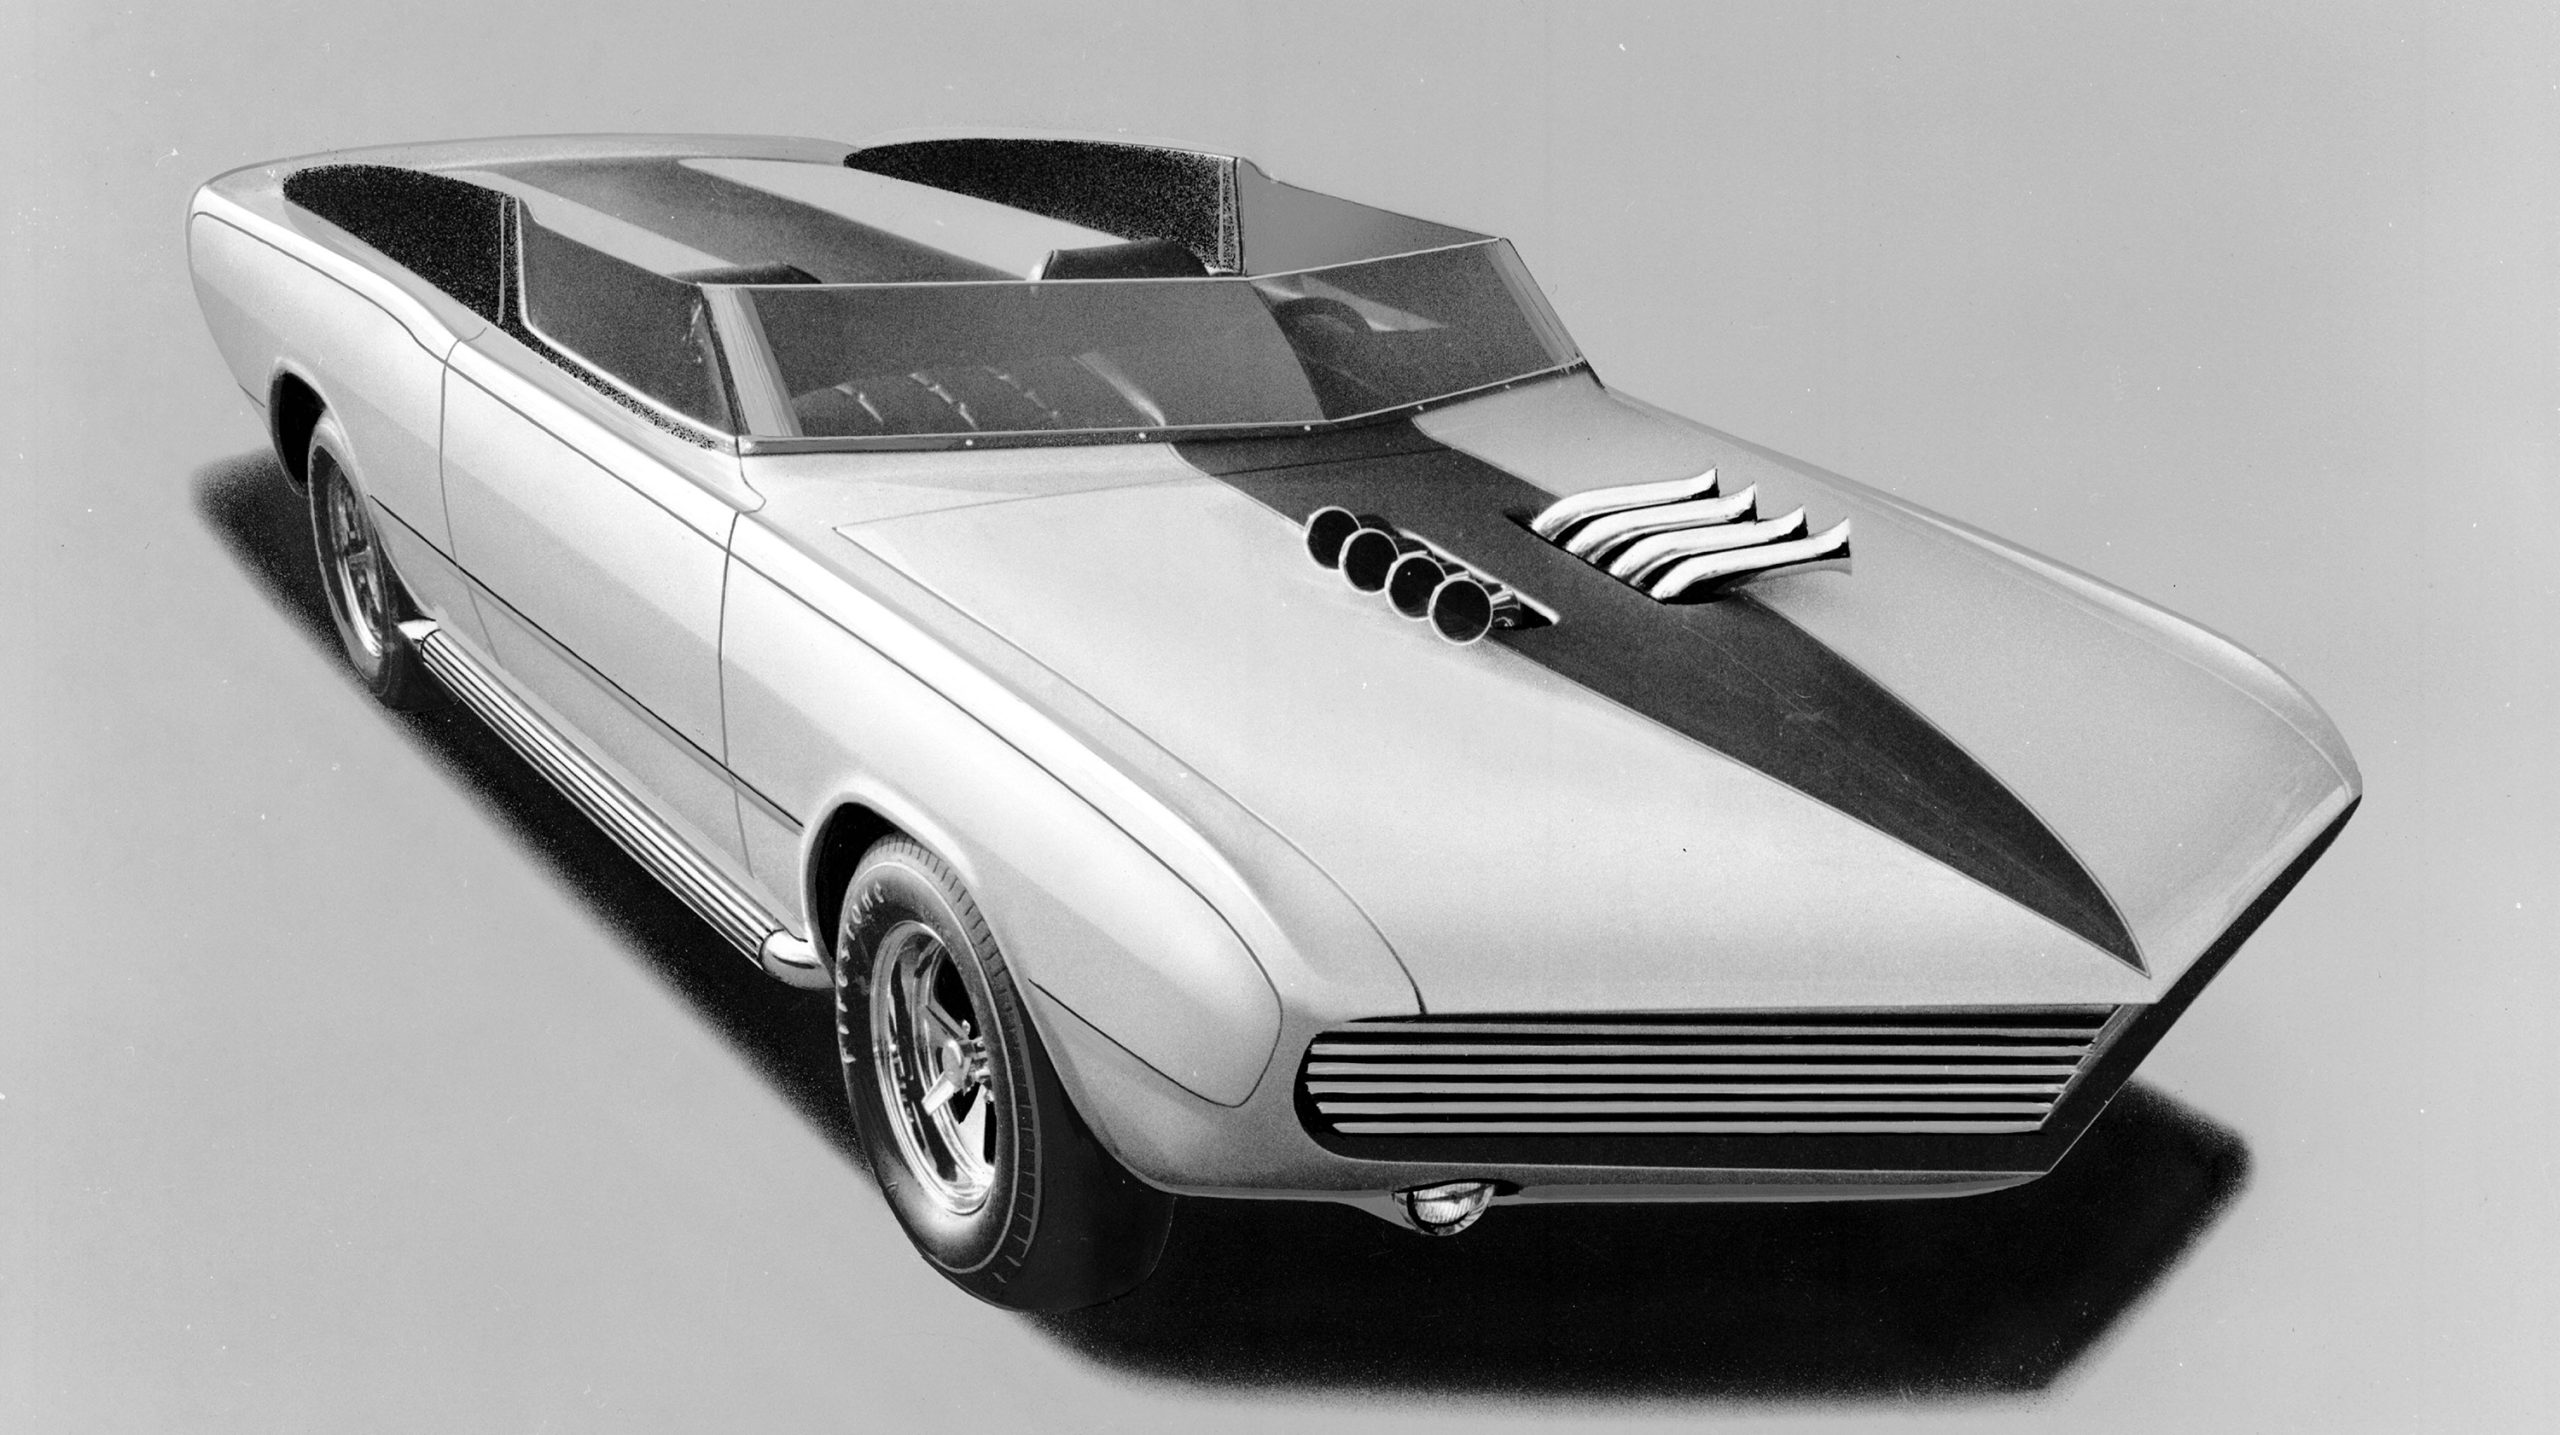 1968 Dodge Charger III concept